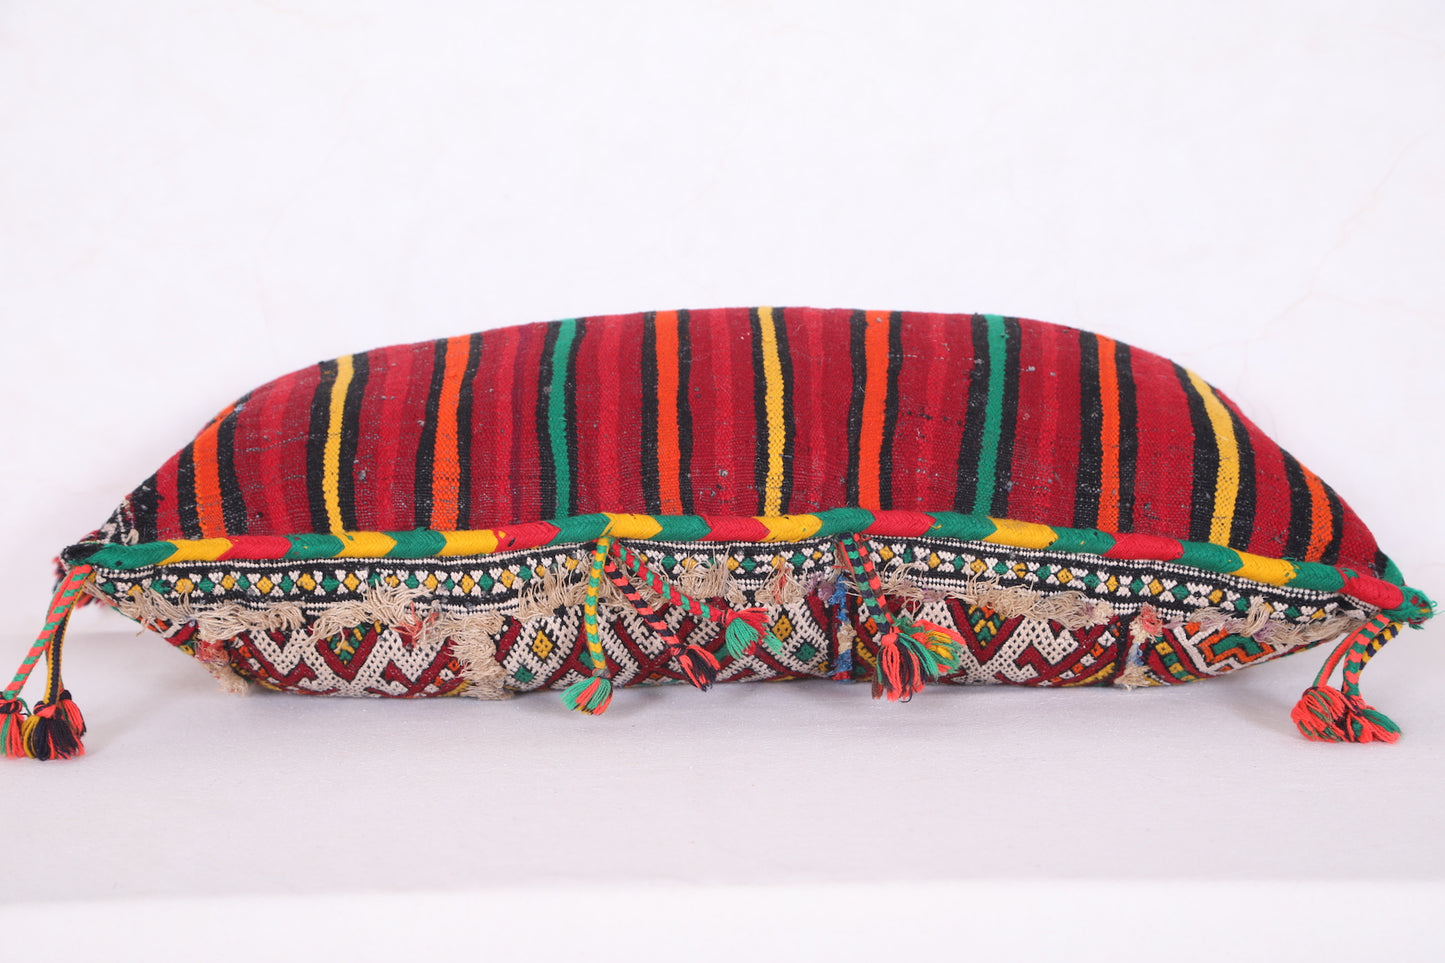 Long Moroccan pillow 14.9 INCHES X 27.1 INCHES